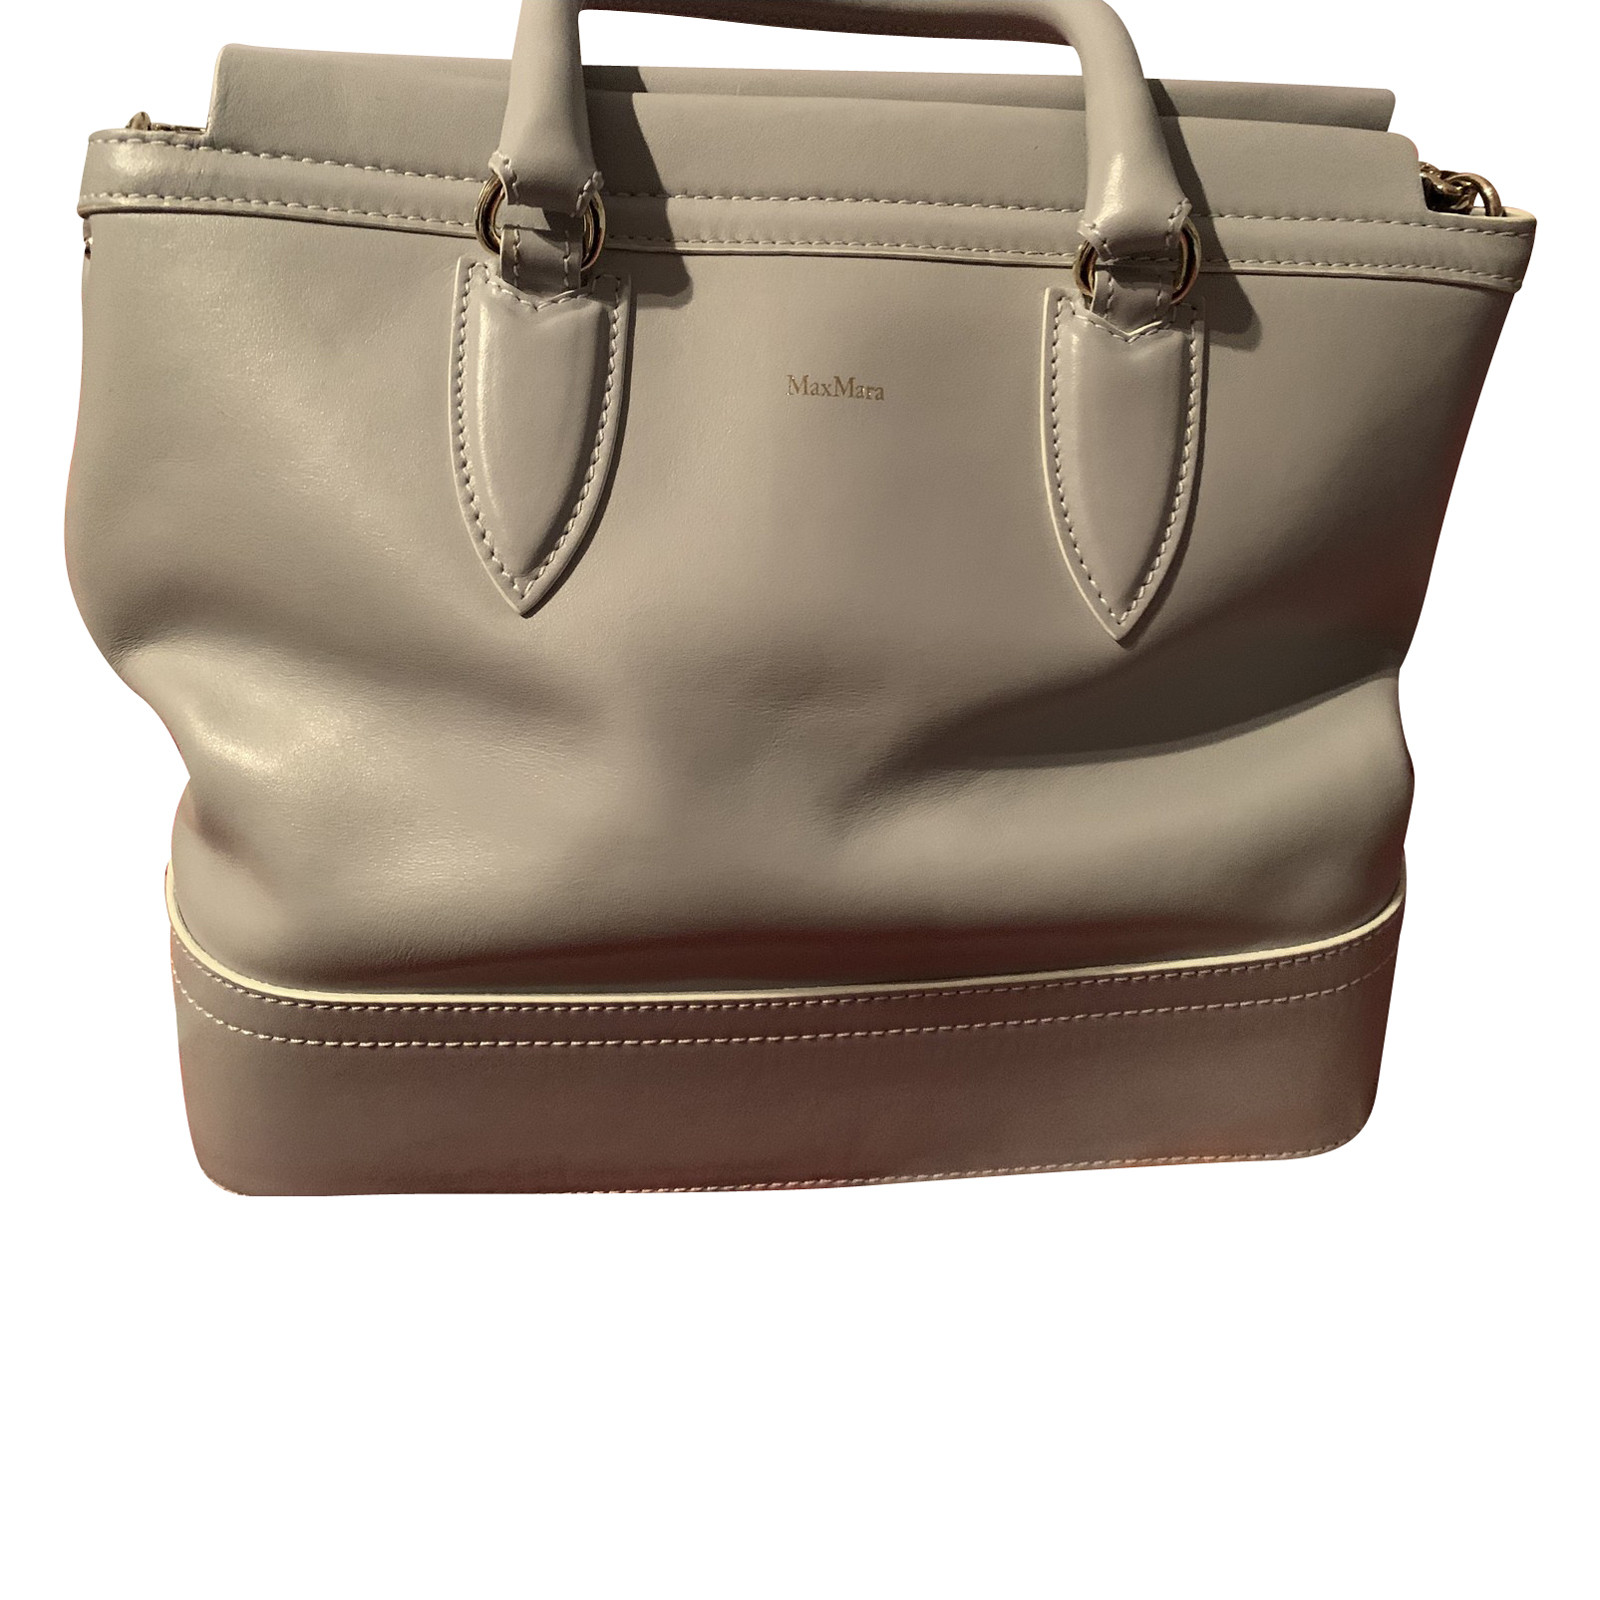 Max Mara Shoulder bag Leather in Grey - Second Hand Max Mara Shoulder bag  Leather in Grey buy used for 200€ (4223832)